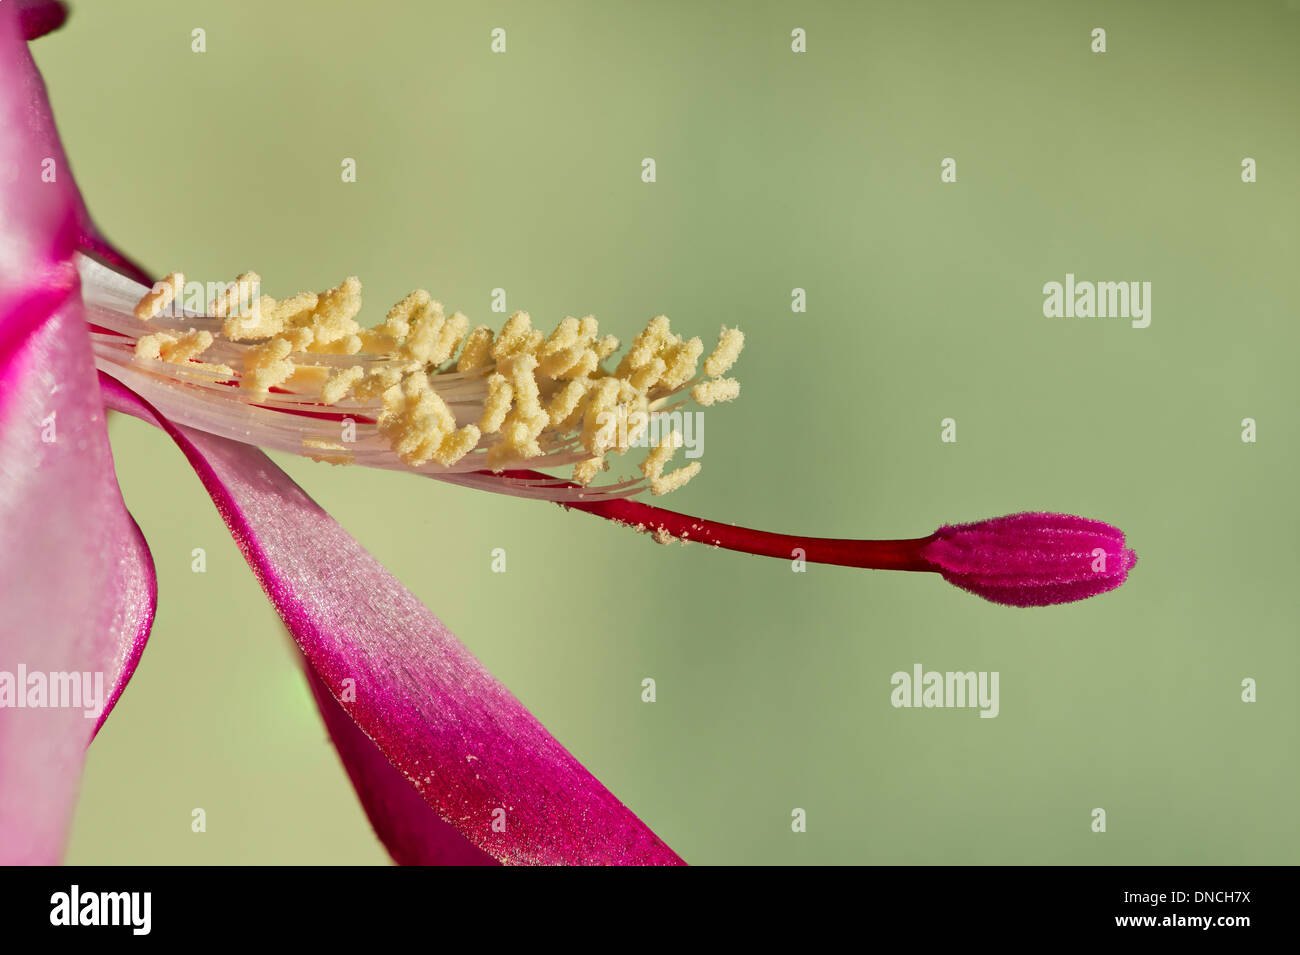 Flower detail of the Christmas cactus (Schlumbergera truncate) with pink-colored stigma Stock Photo